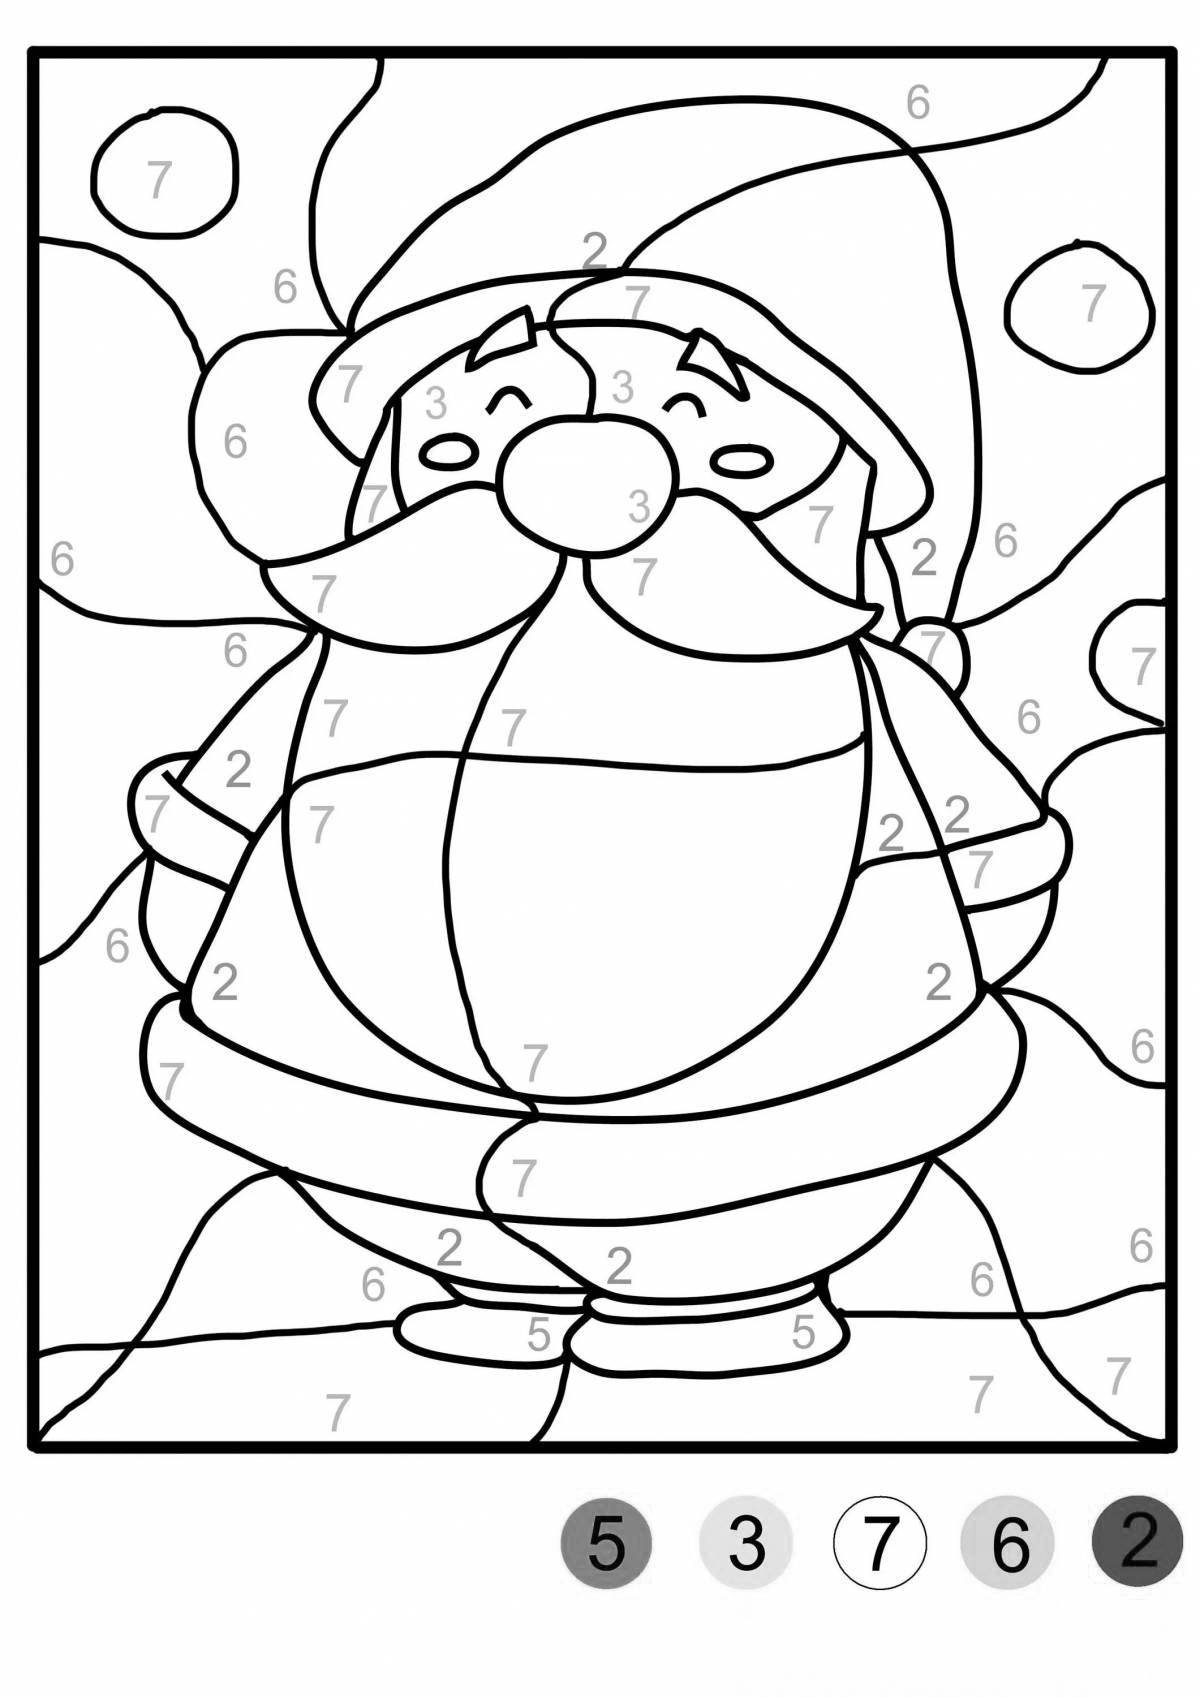 Blissful Winter by Numbers coloring page